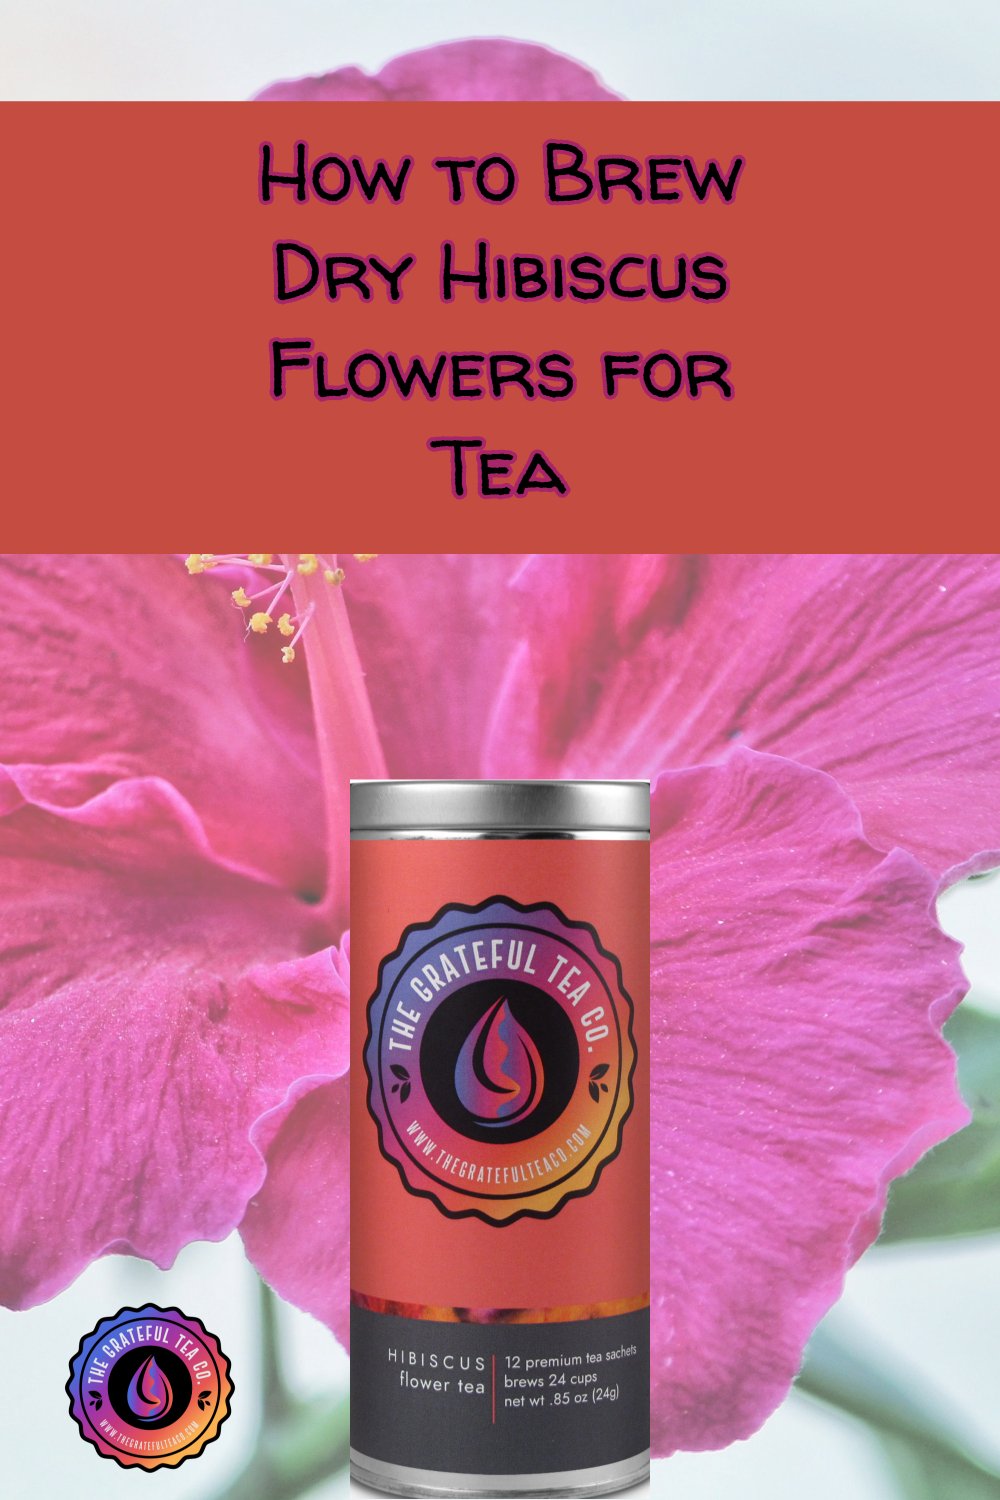 How to Brew Dry Hibiscus Flowers for Hot Tea